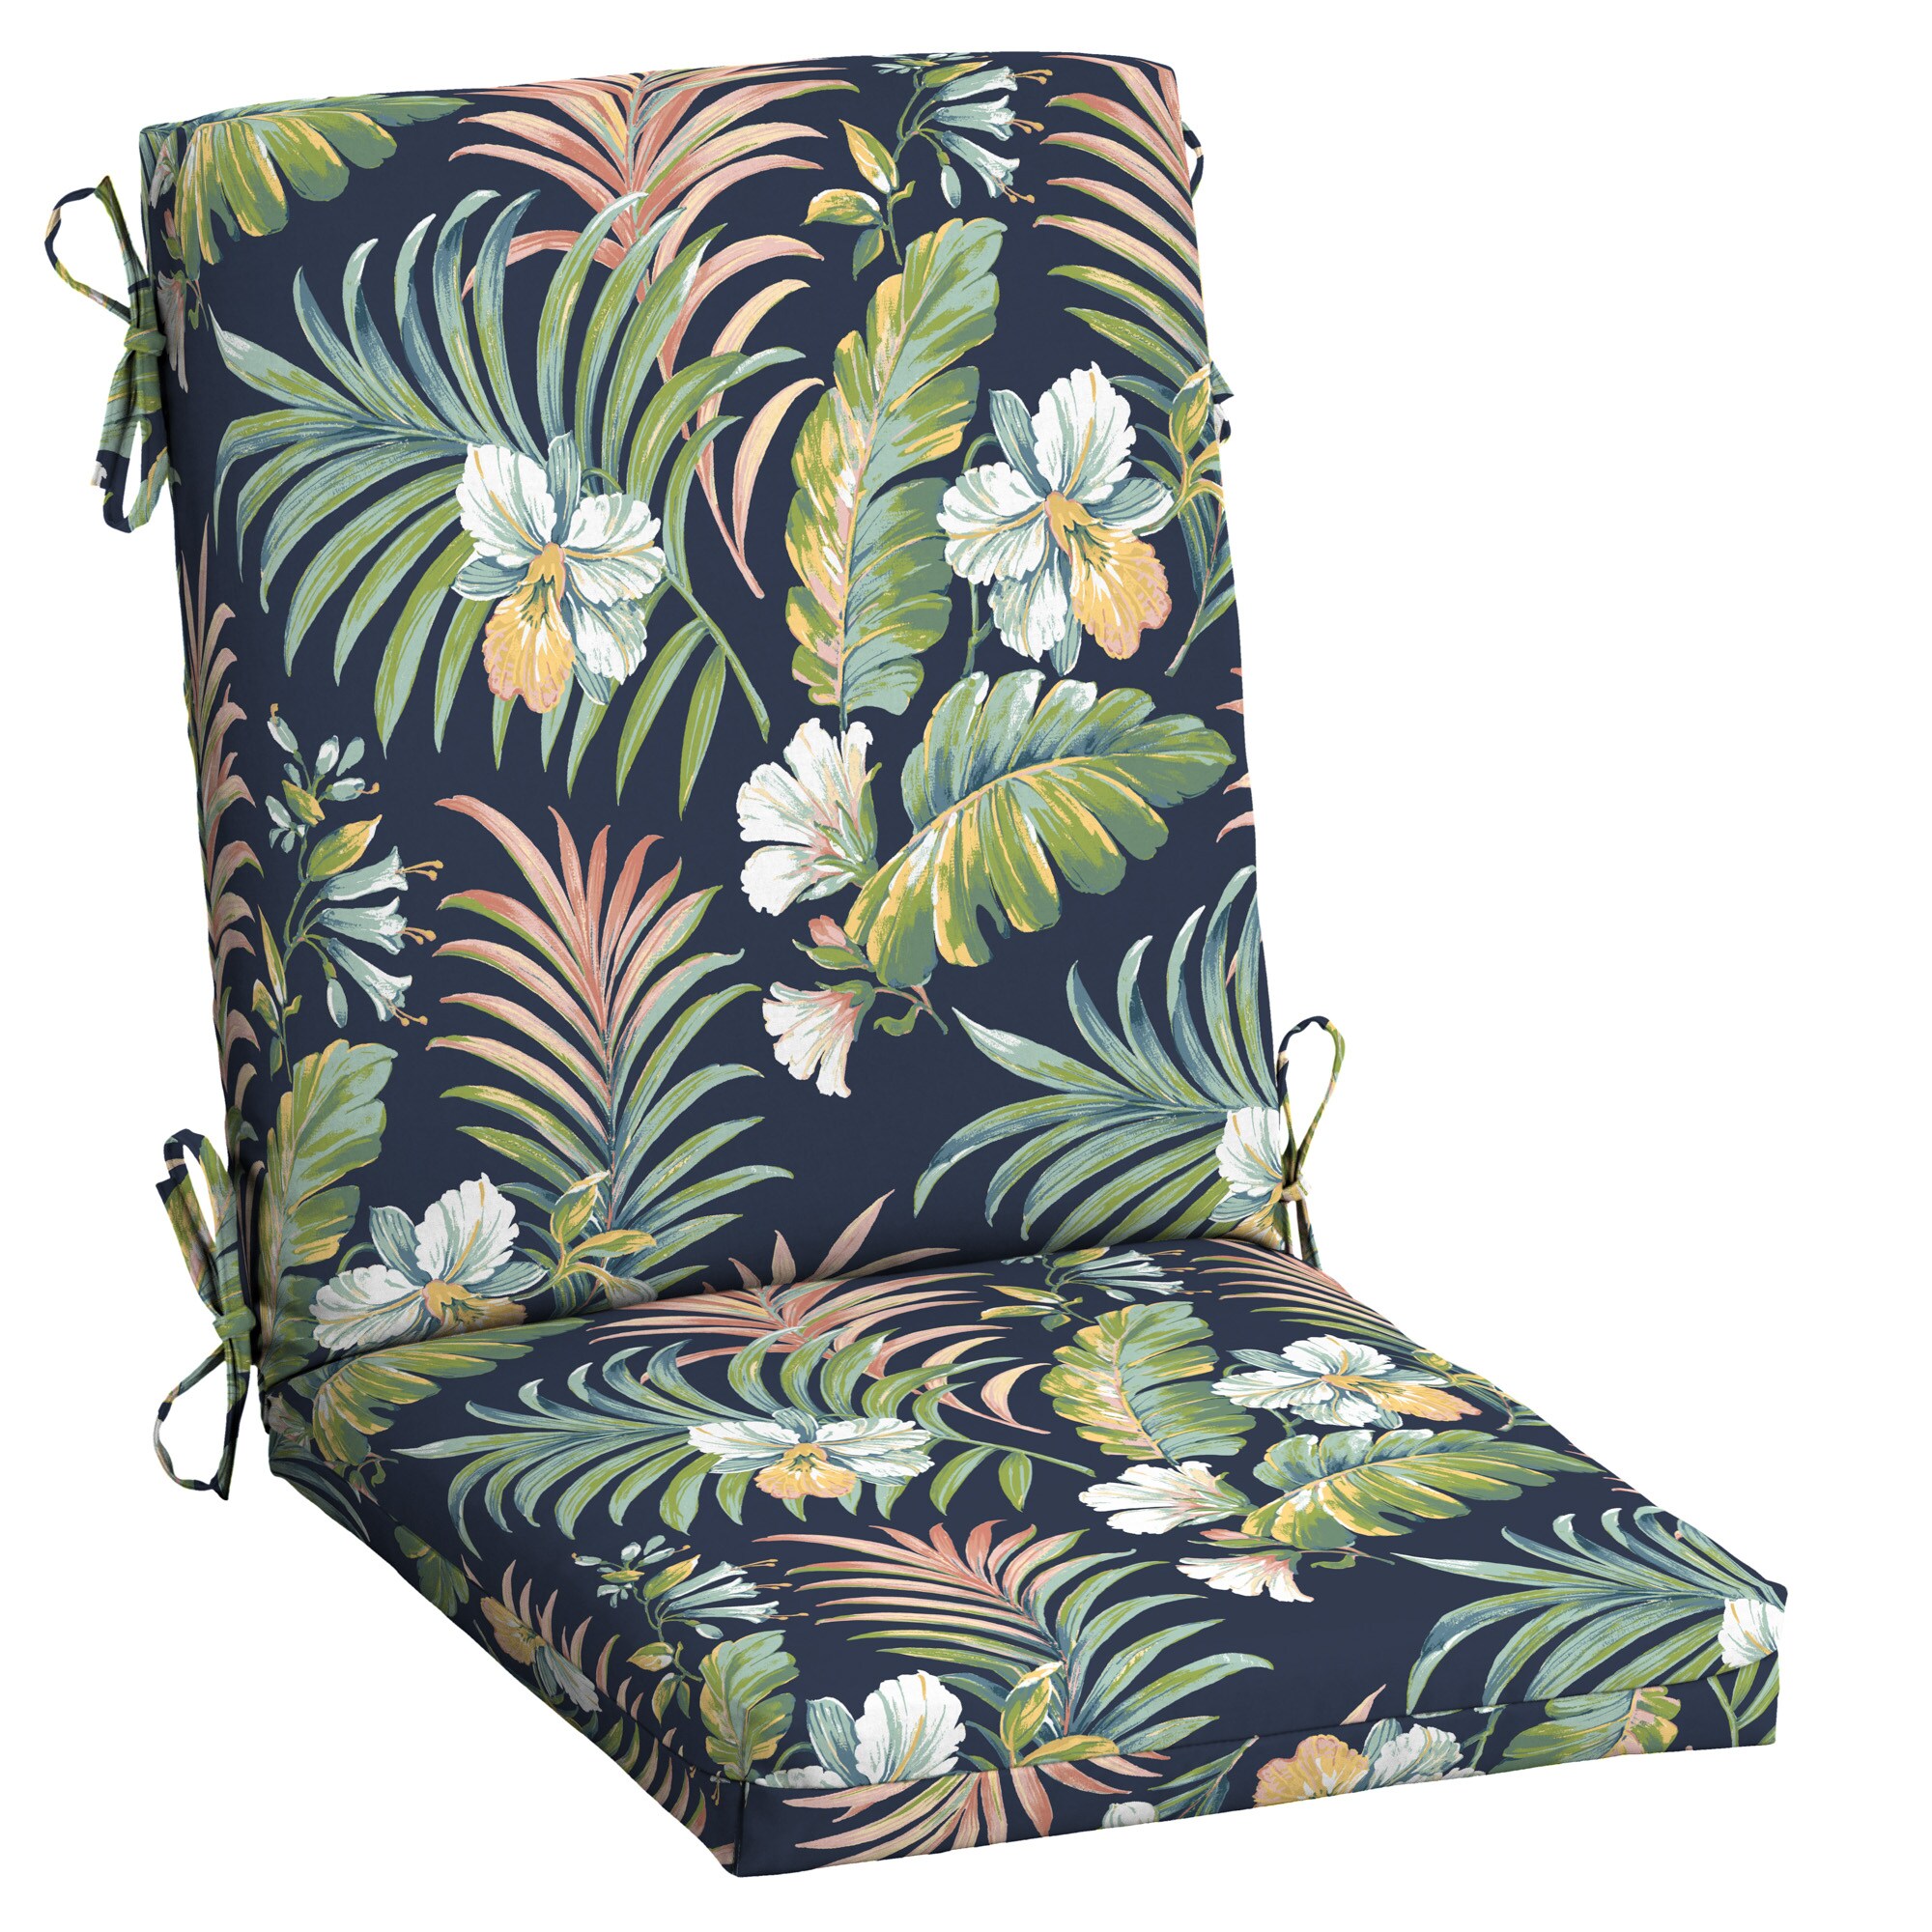 Outdoor Tufted Chair Cushions Blue Nautical Tropical Choose Size Set of 4 In 